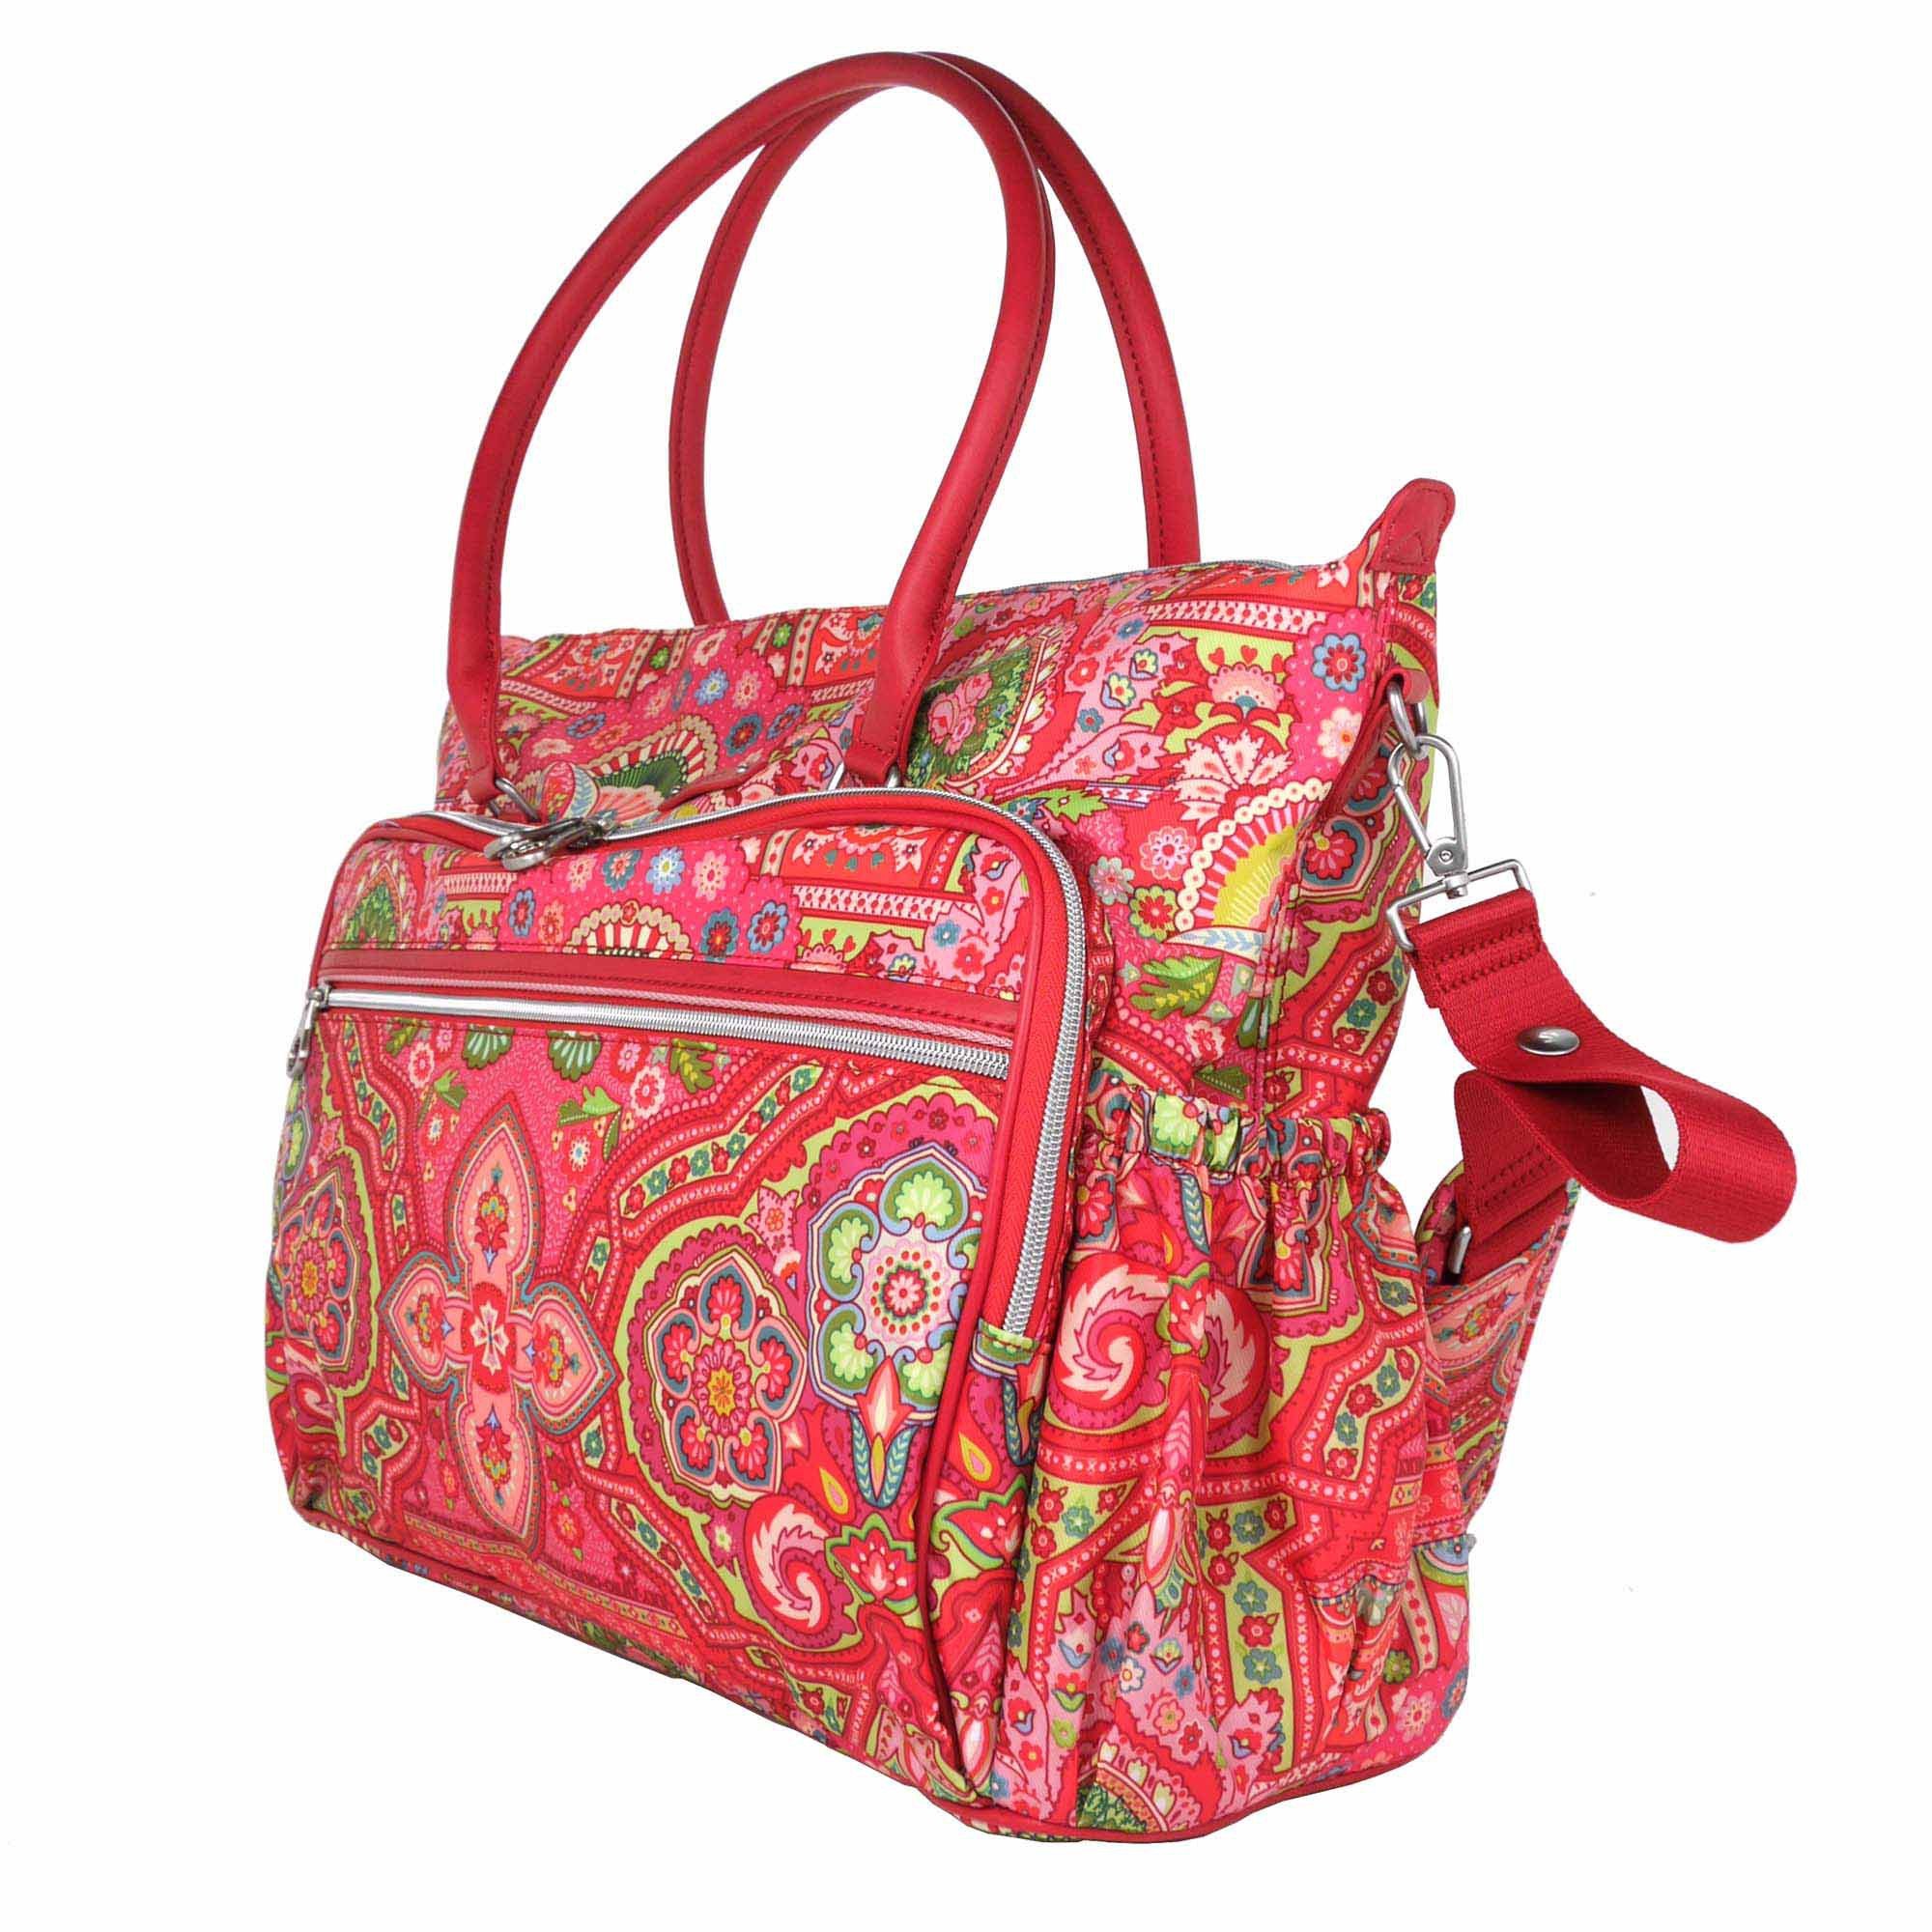 Oilily Diaper Bag Baby Bag Spring Ovation In 4 Colours | eBay